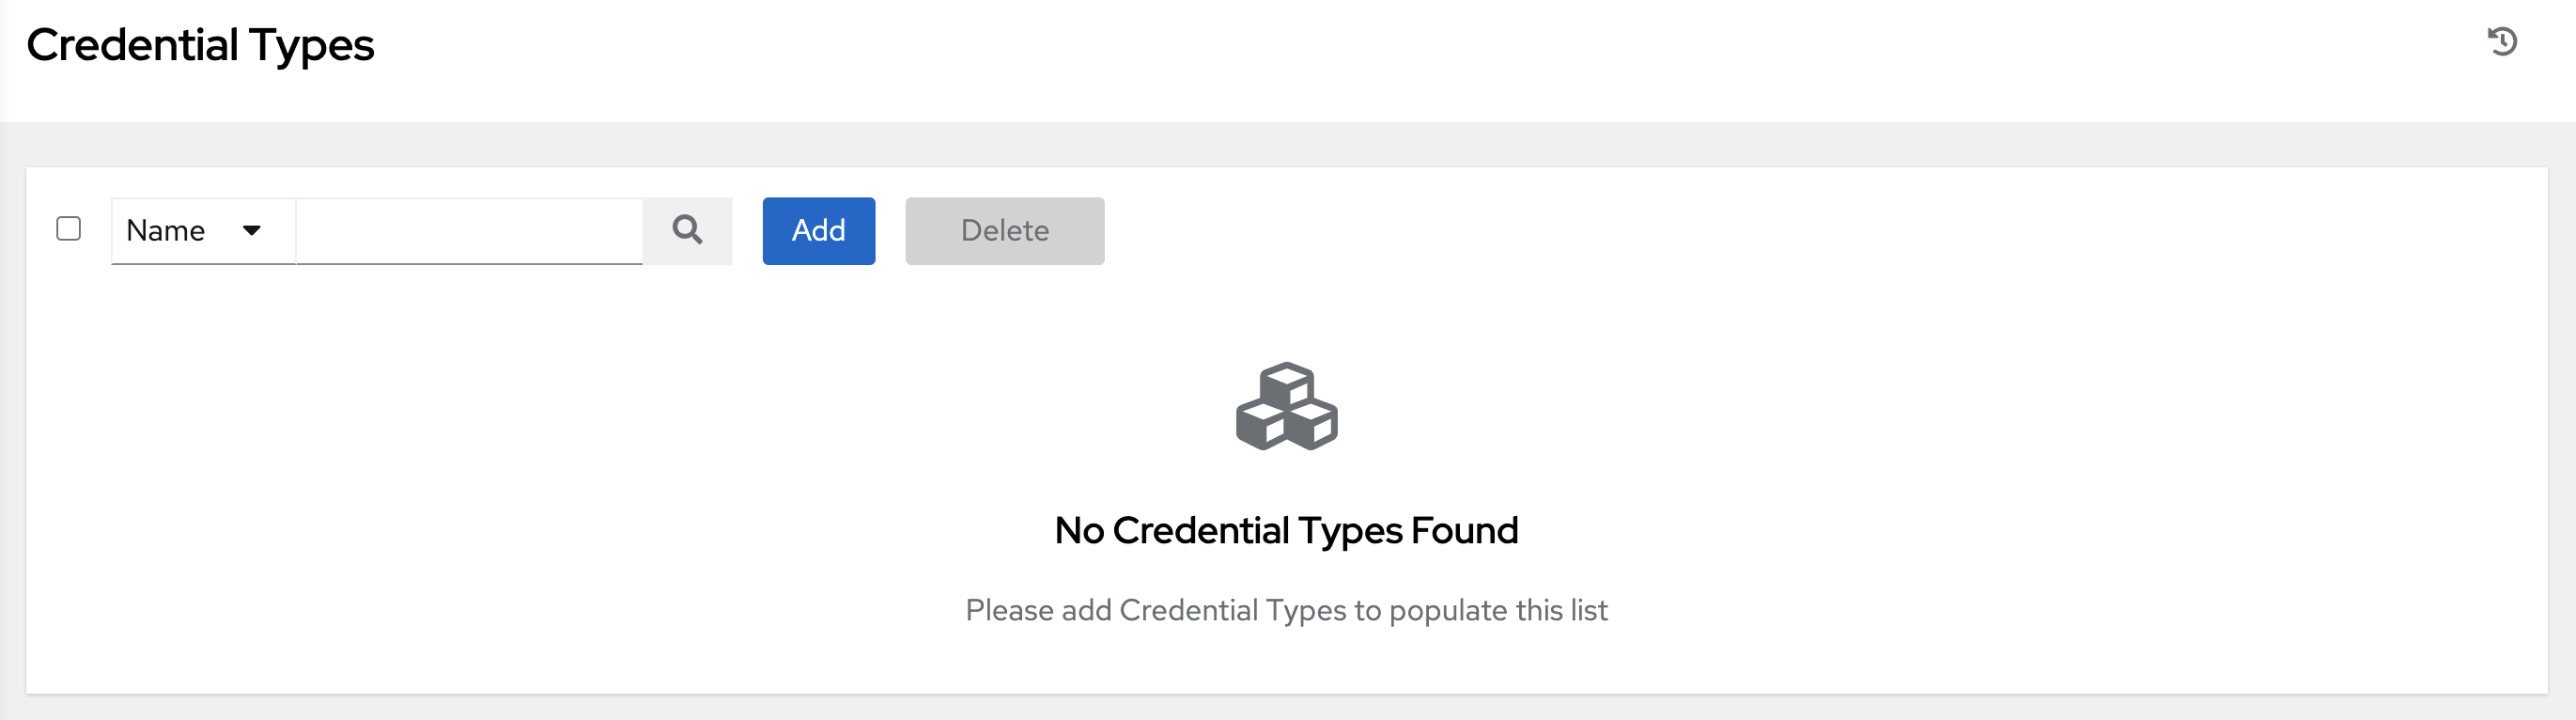 Credential Types view without any credential types populated